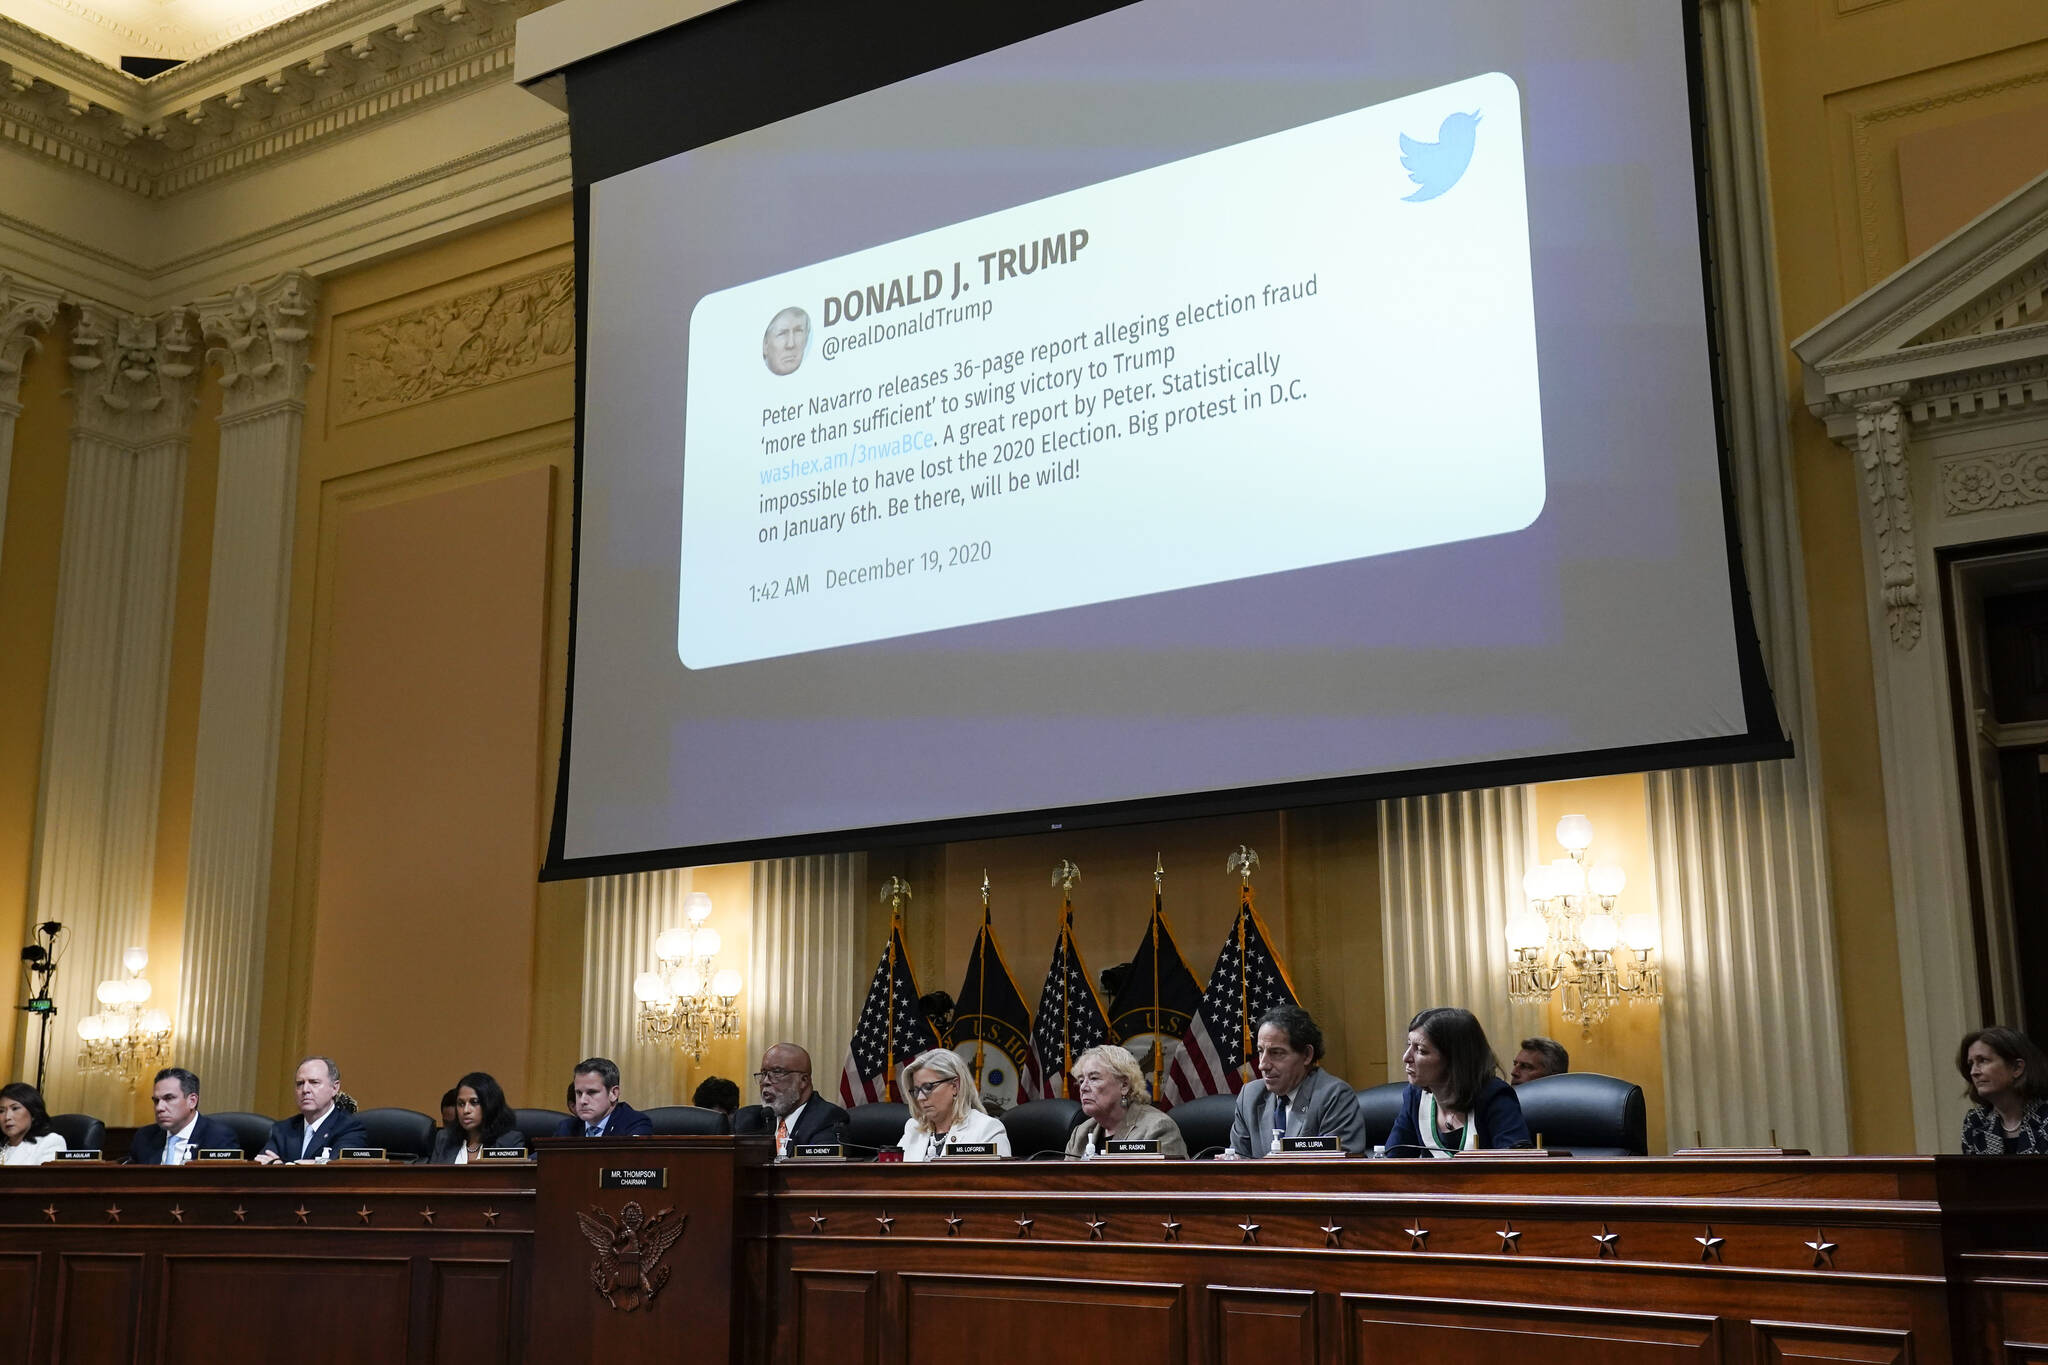 A tweet from former President Donald Trump is displayed as the House select committee investigating the Jan. 6 attack on the U.S. Capitol continues to reveal its findings of a year-long investigation, at the Capitol in Washington, Thursday, June 23, 2022. From left, Rep. Stephanie Murphy, D-Fla., Rep. Pete Aguilar, D-Calif., Rep. Adam Schiff, D-Calif., Soumya Dayananda, committee investigative staff counsel, Rep. Adam Kinzinger, R-Ill., Chairman Bennie Thompson, D-Miss., Vice Chair Liz Cheney, R-Wyo., Rep. Zoe Lofgren, D-Calif., Rep. Jamie Raskin, D-Md., and Rep. Elaine Luria, D-Va. (AP Photo/J. Scott Applewhite)